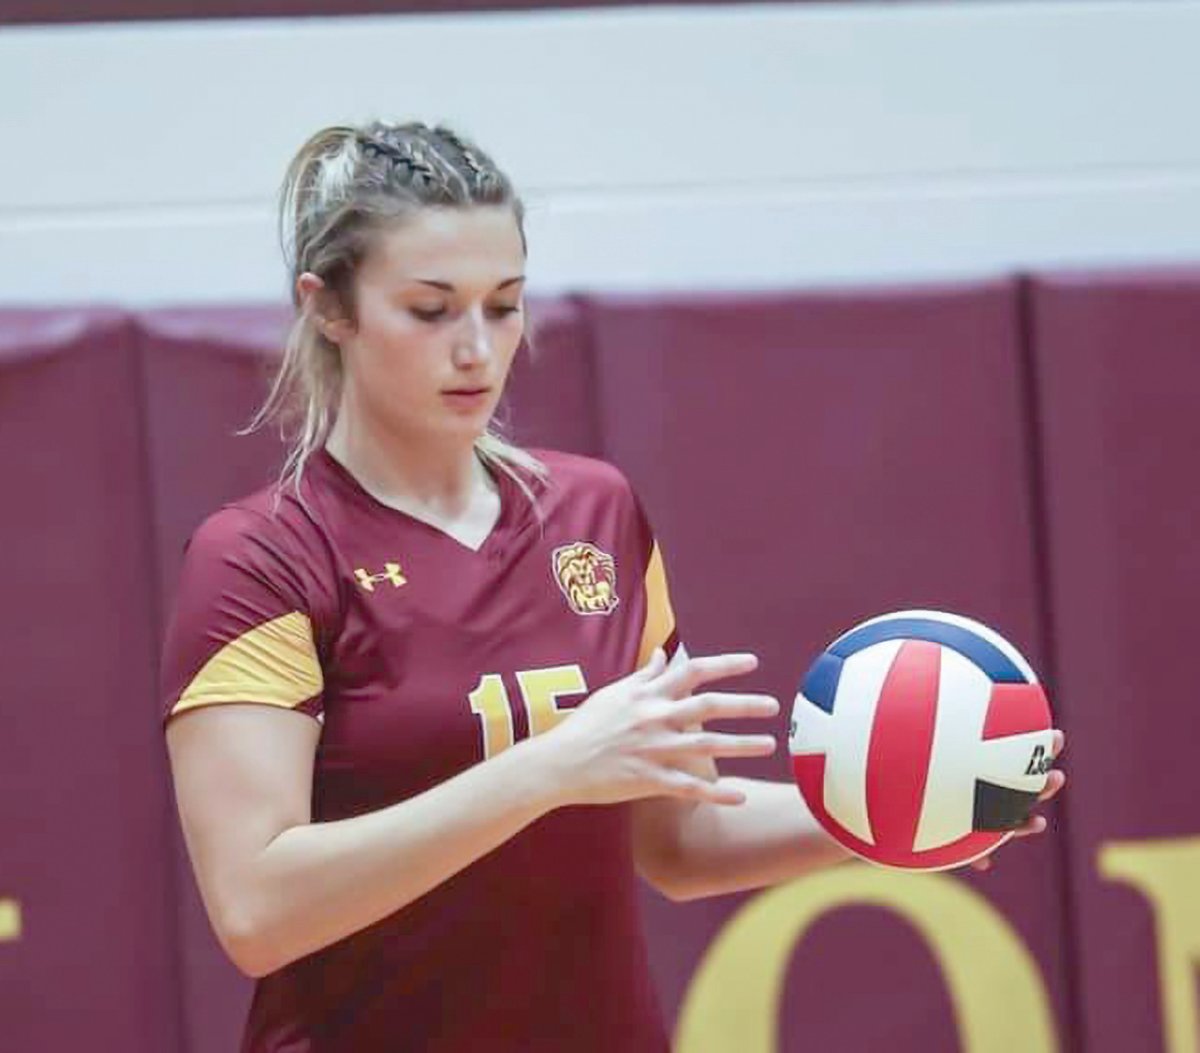 The Mansfield Lady Lions volleyball team had one player who received All-District honors for Class 2, District 9.
Harleigh Hodges received second team honors for the Lady Lions in the program’s first season since the 1990s.